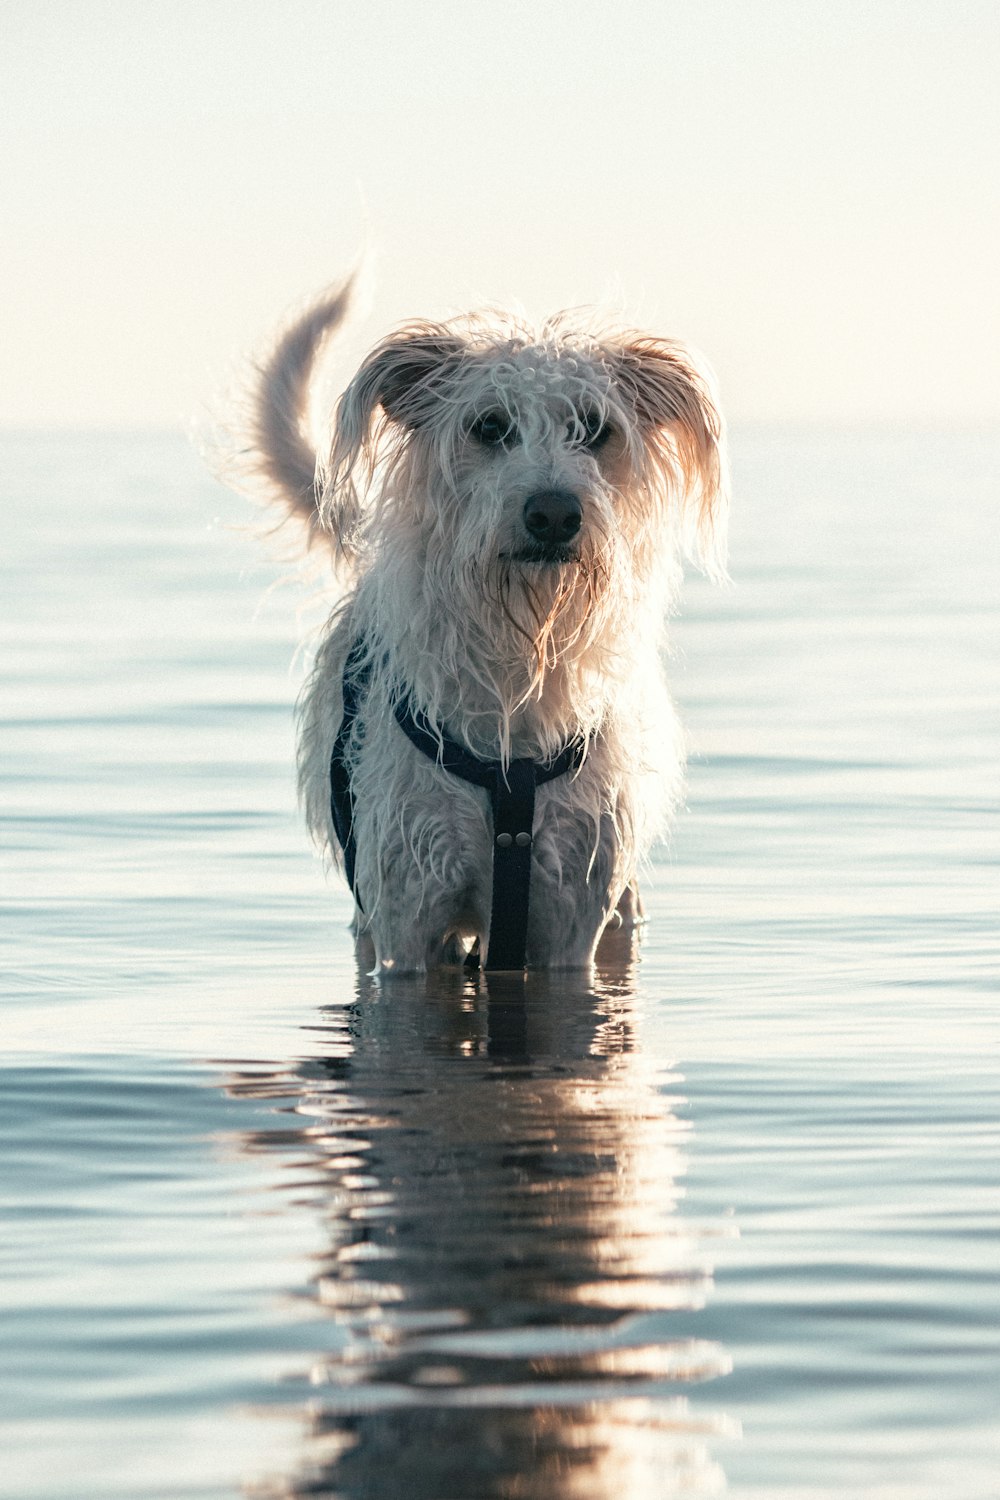 white and brown long coated dog running on water during daytime